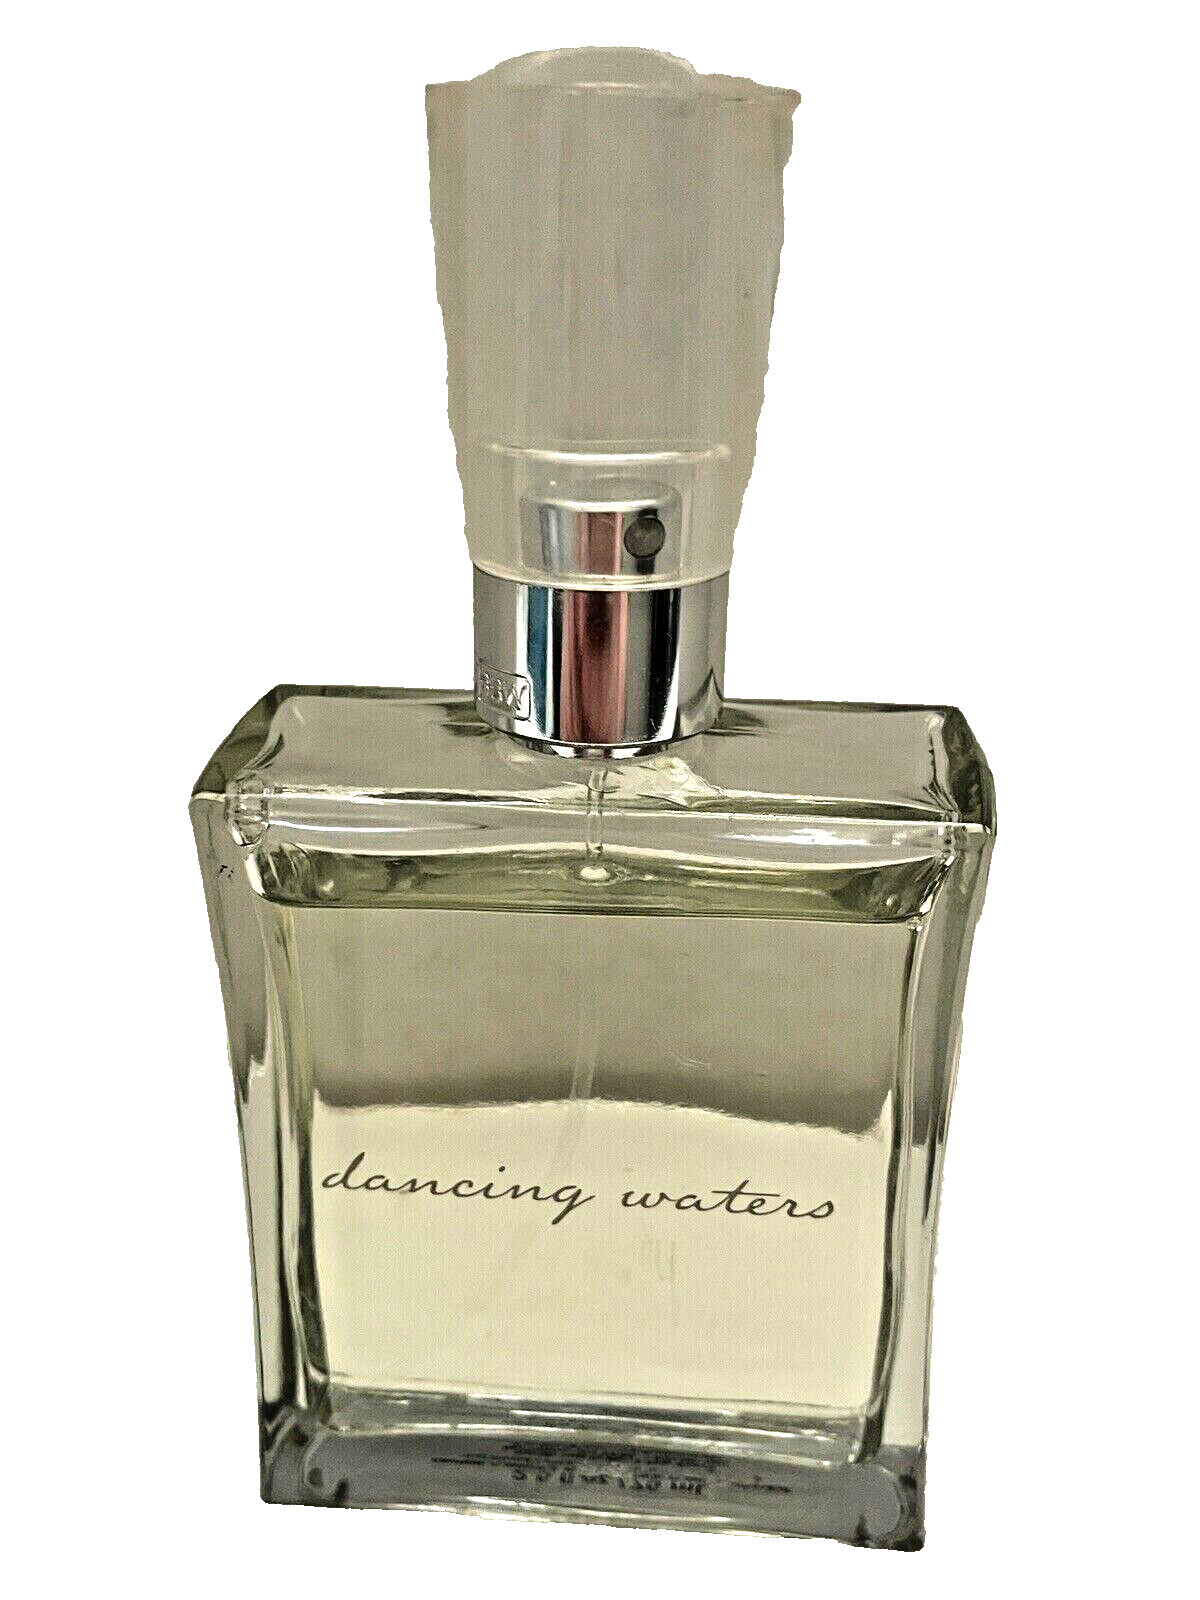 Perfume Bath & Body Works Dancing Waters EDT 2.5 oz No Box 85% Left Rare Props